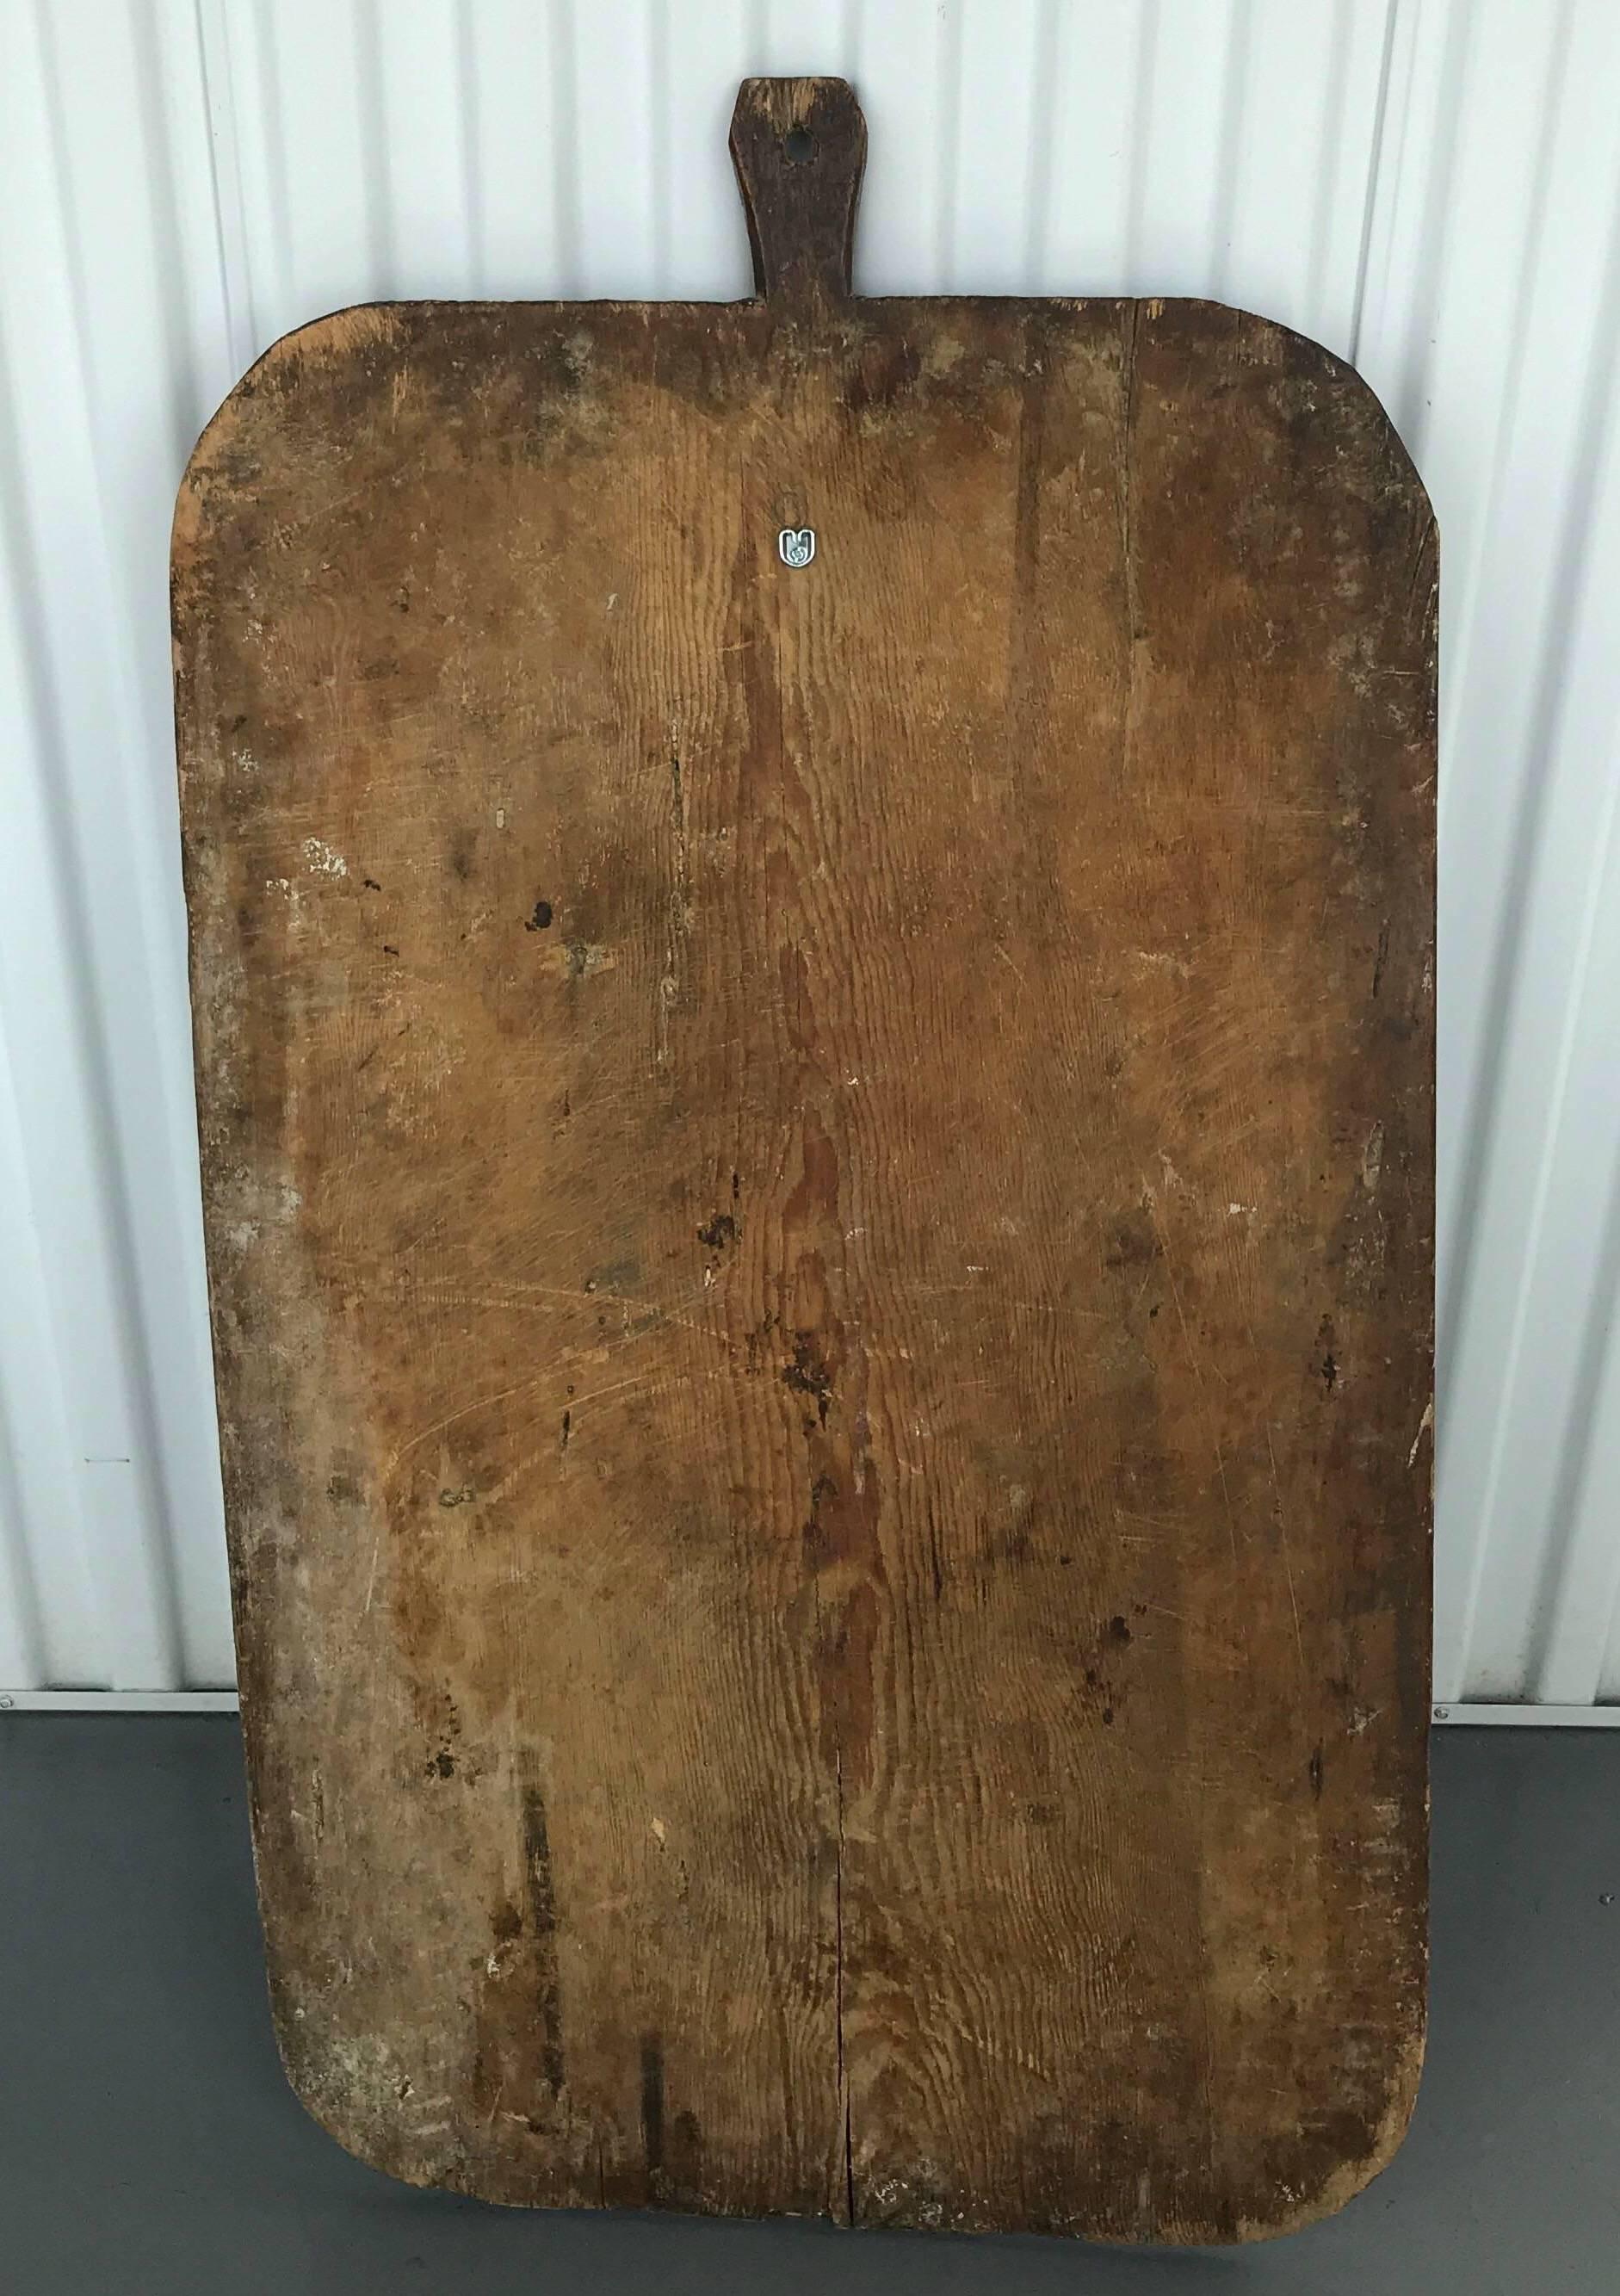 Early 20th century European cutting or bread board from France




Dimensions: Board total is 41 in. H x 22.25 in. W x .75 in. D; excluding handle: 37.5 in. H x 22.25 in. W with a handle that is 3.5 in. H x 2.25 in. W